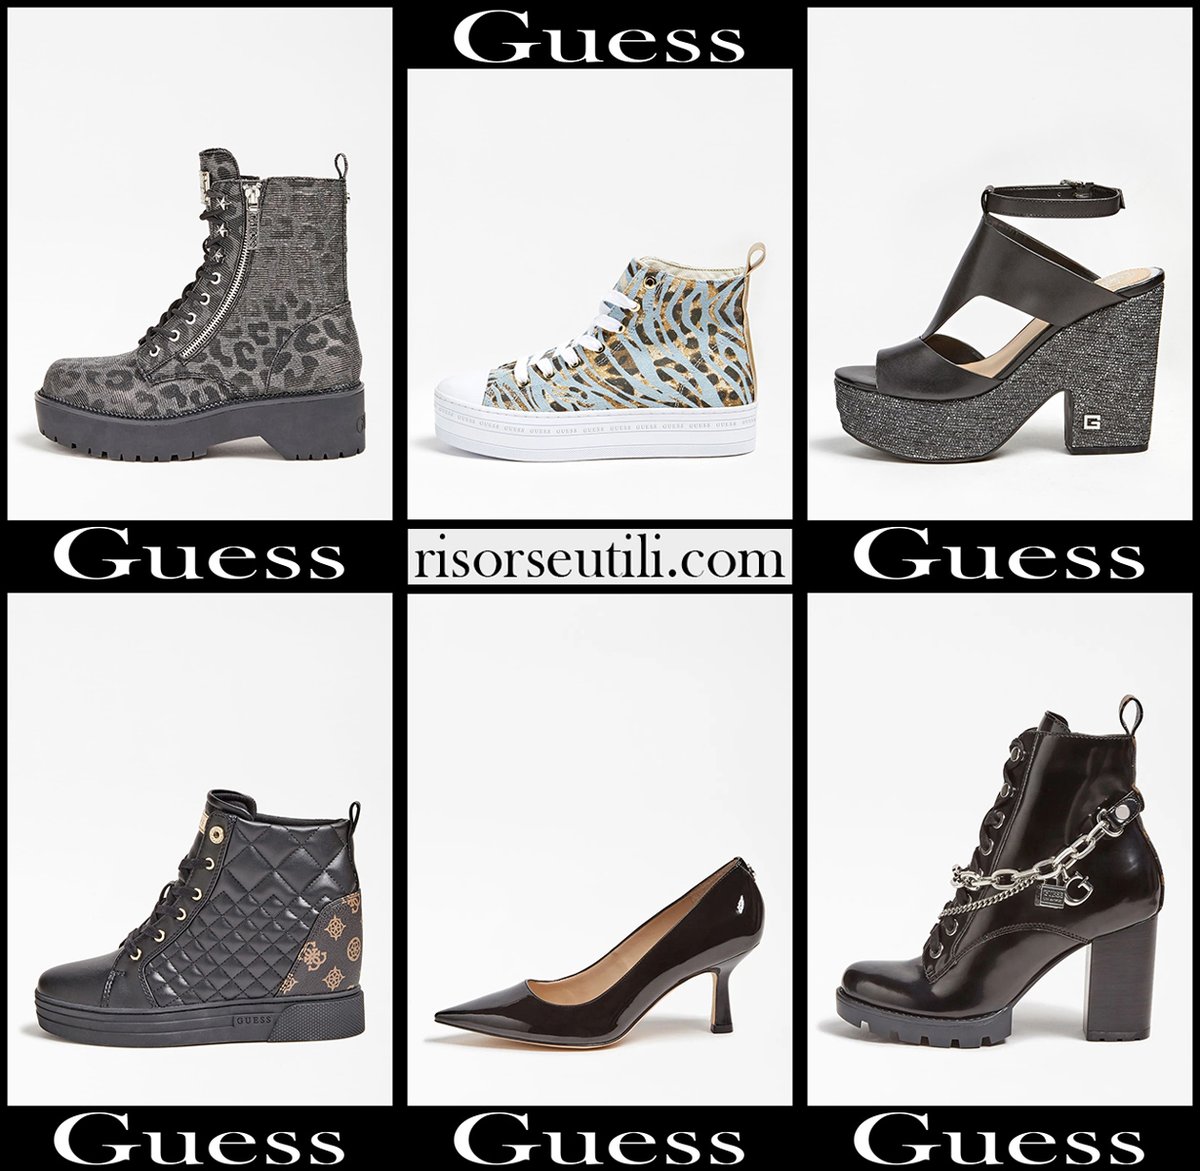 Guess shoes 2020 new arrivals women's footwear where we discover engaging creations.  #Guess #Guessnewarrivals #Guessshoes #Guessshoes2020 #Guessshoes2020forwomen #Guesswomensfootwear #shoesGuess risorseutili.com/shoes/guess-sh…